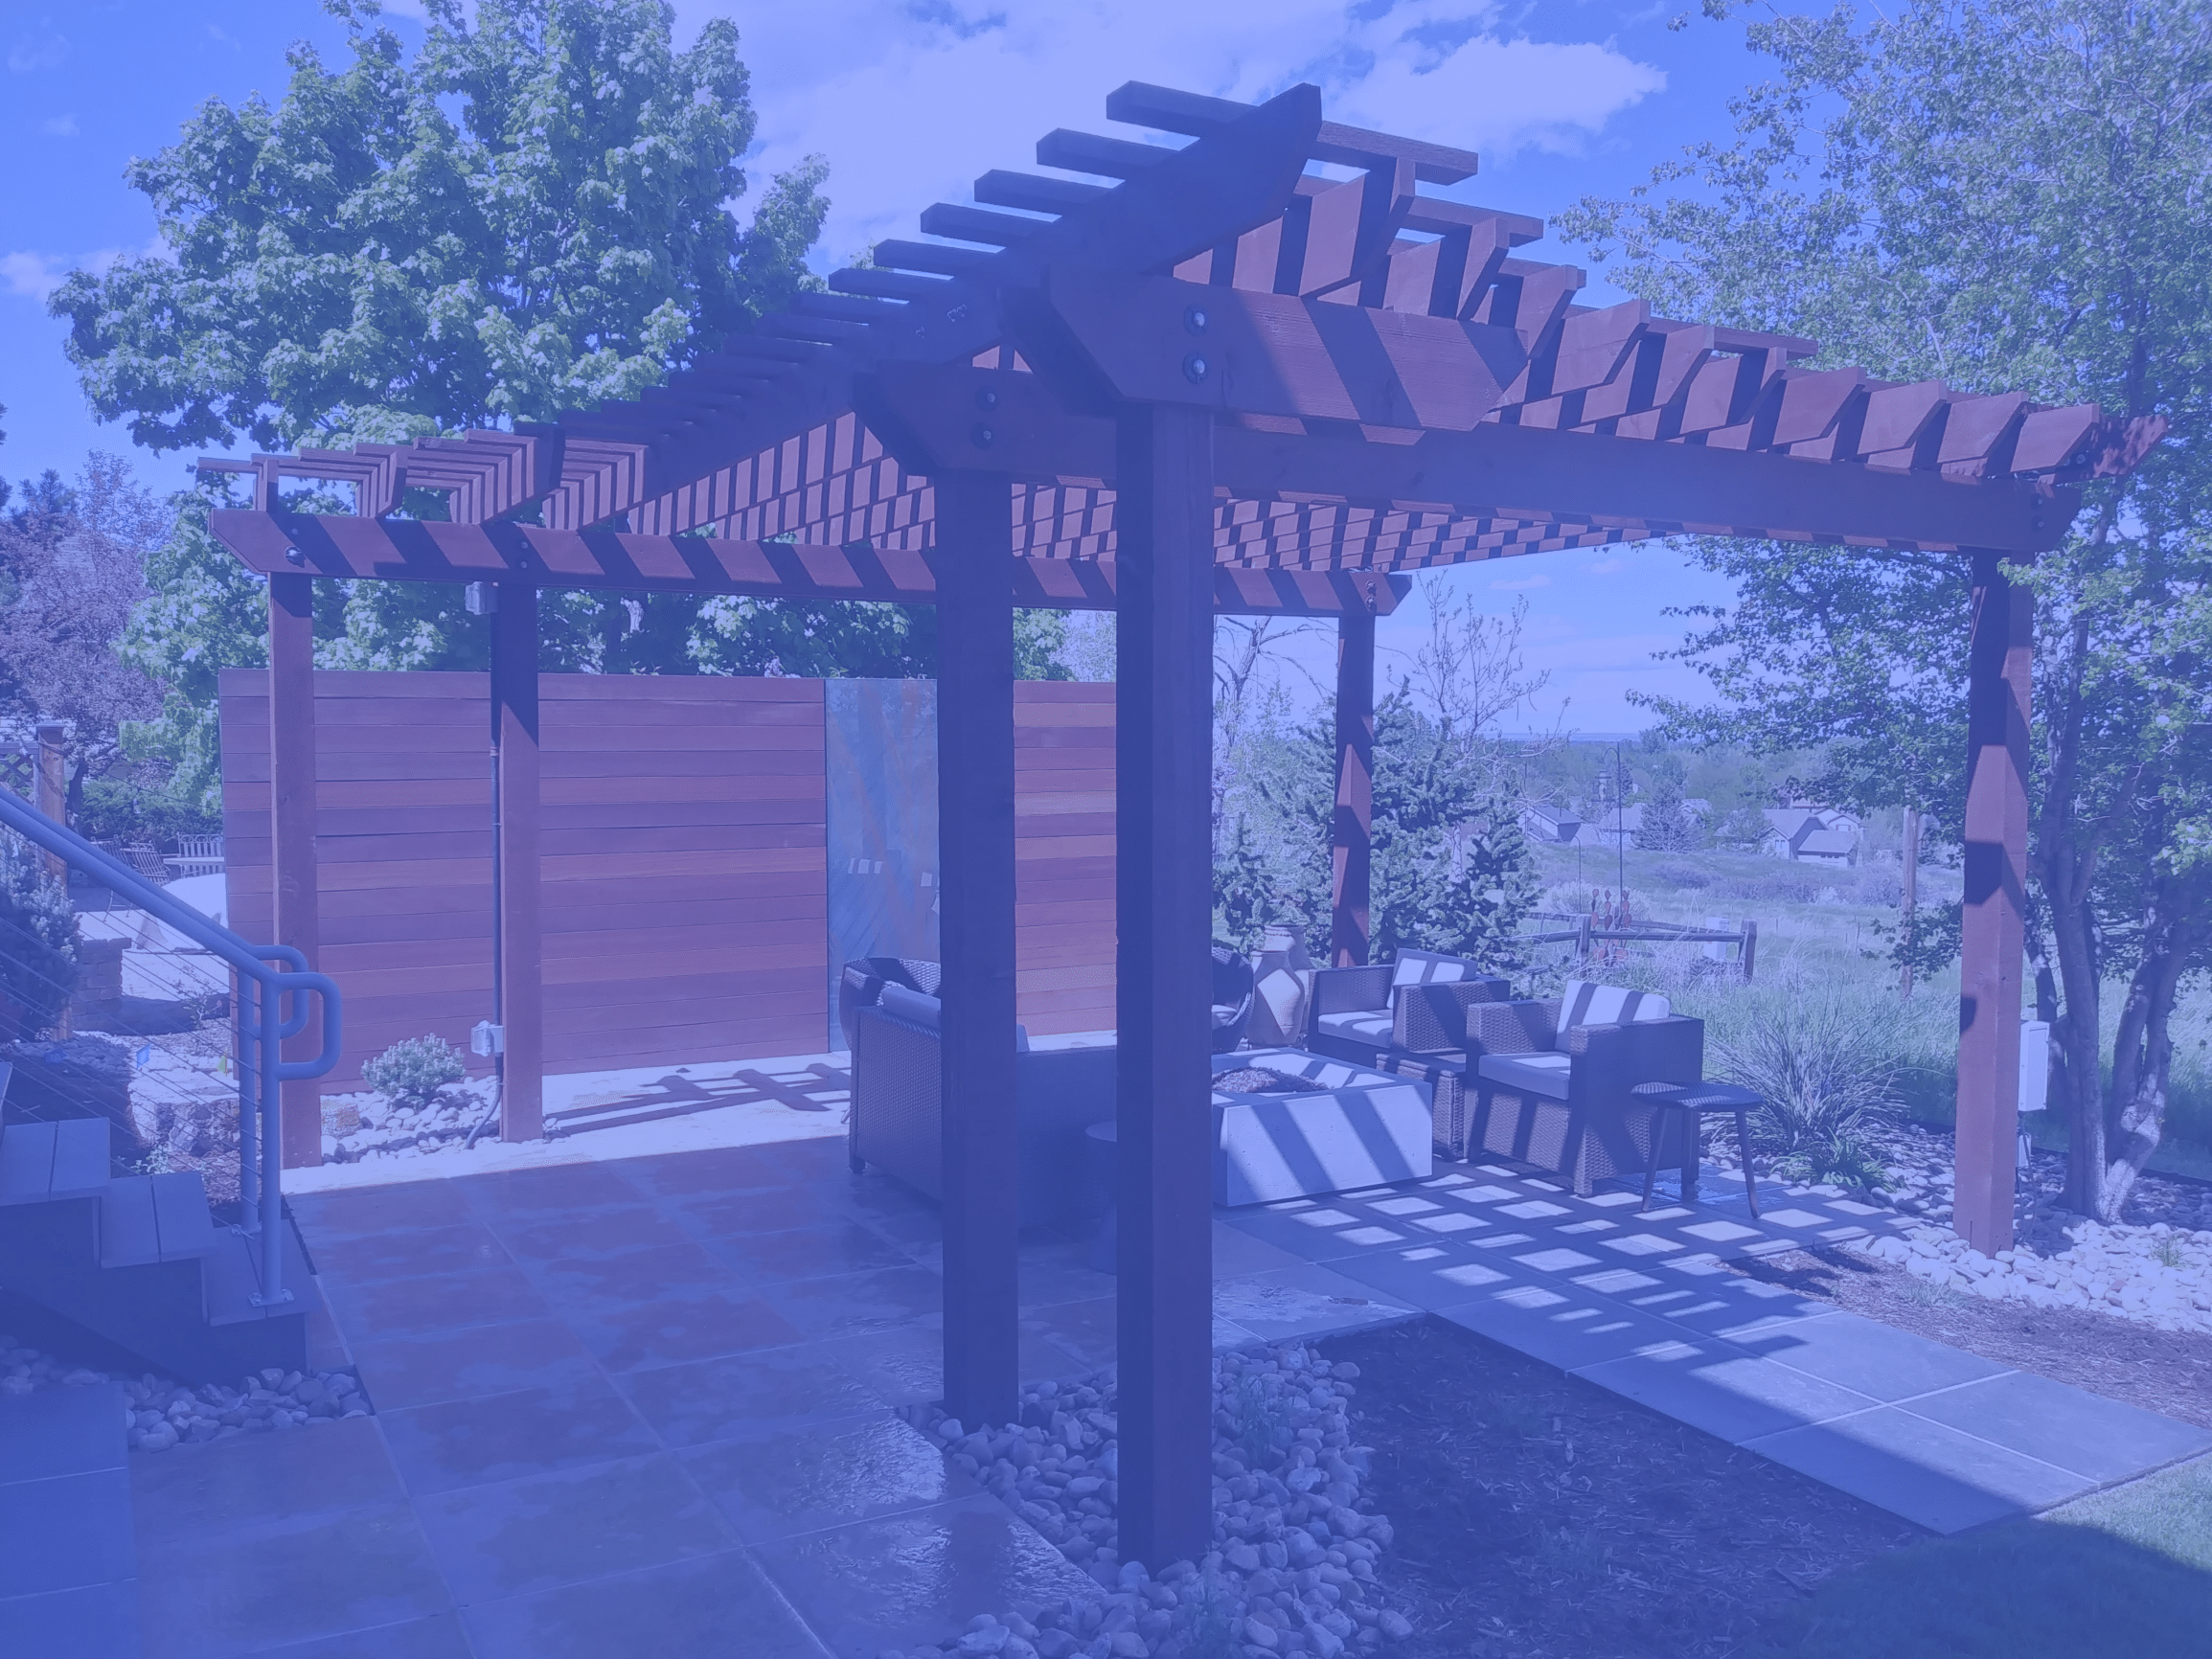 Pergola with flat tile patio and seating area blocked by wind/privacy wall.